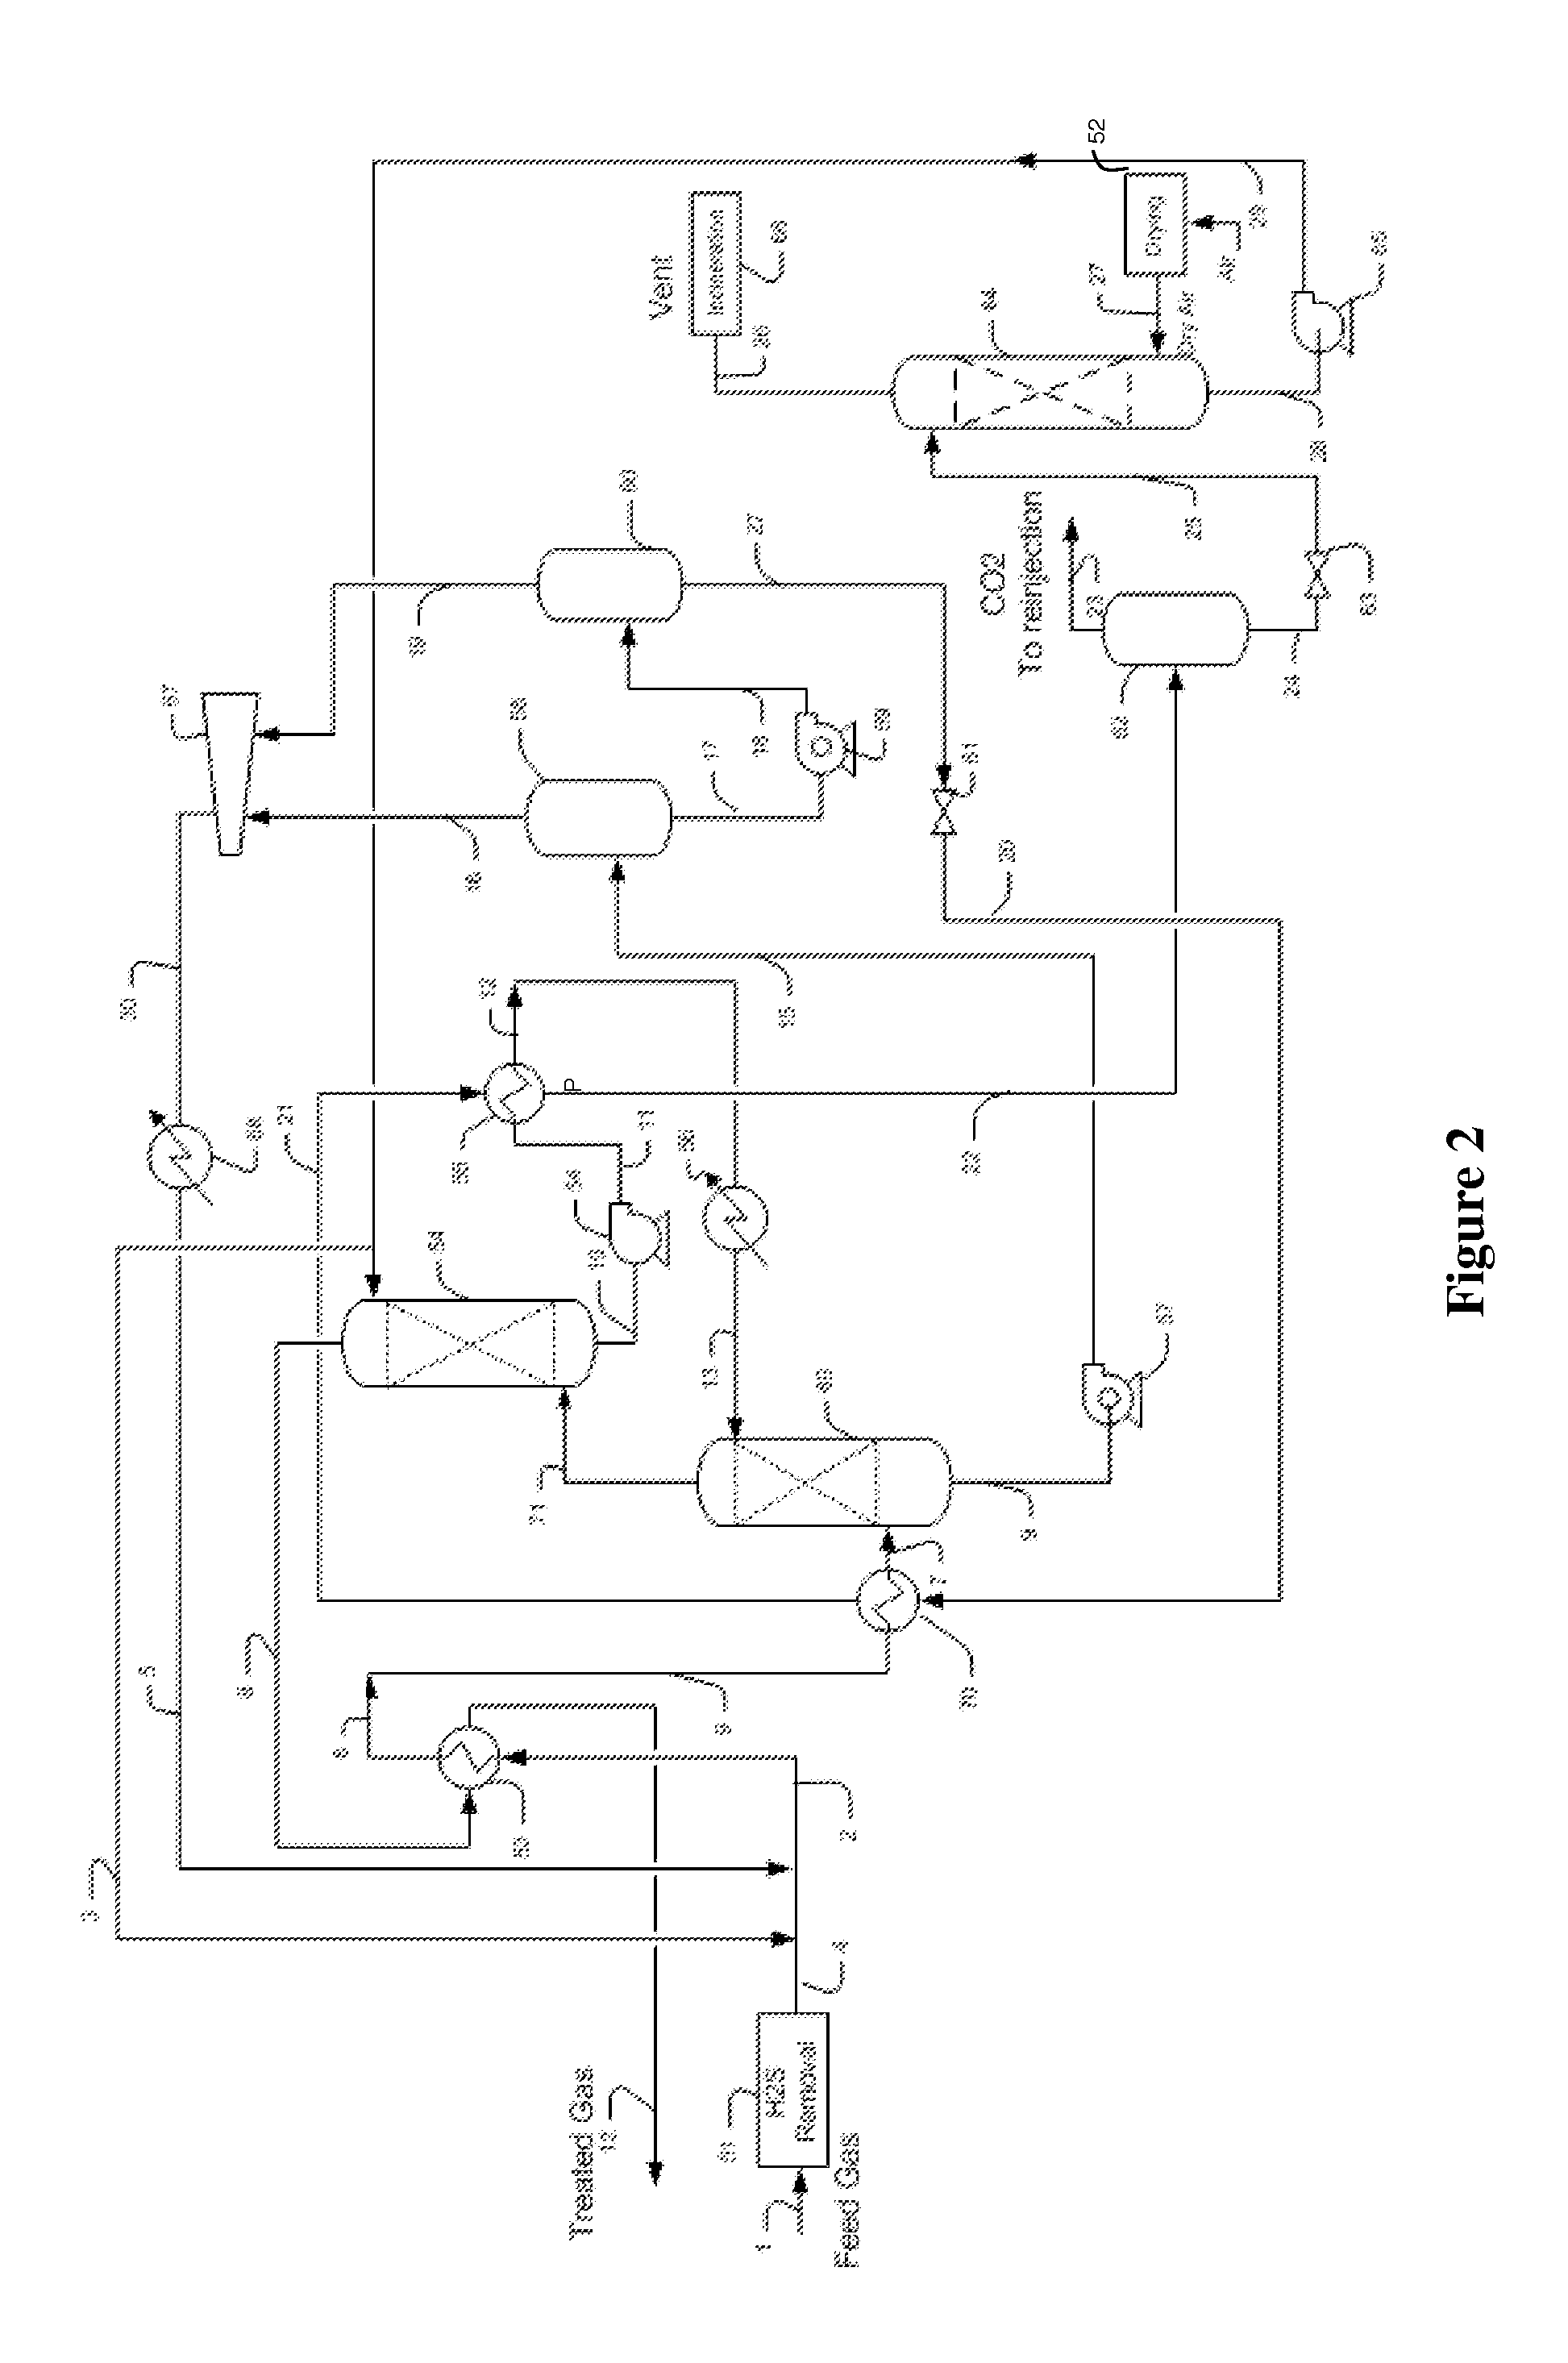 Configurations and methods of flexible co2 removal